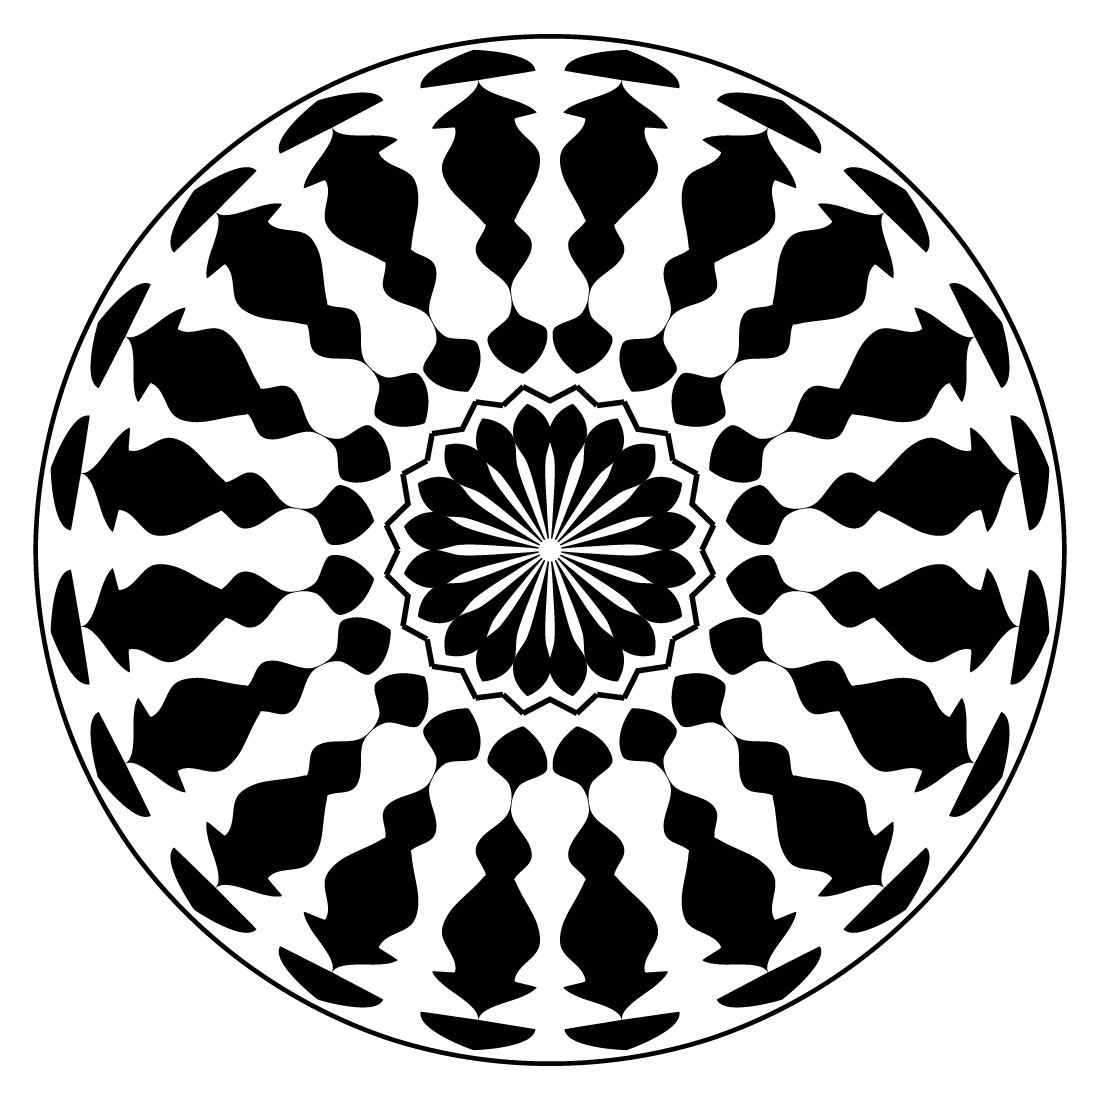 Mandala-art-with-rounded-bars-and-pilers preview image.